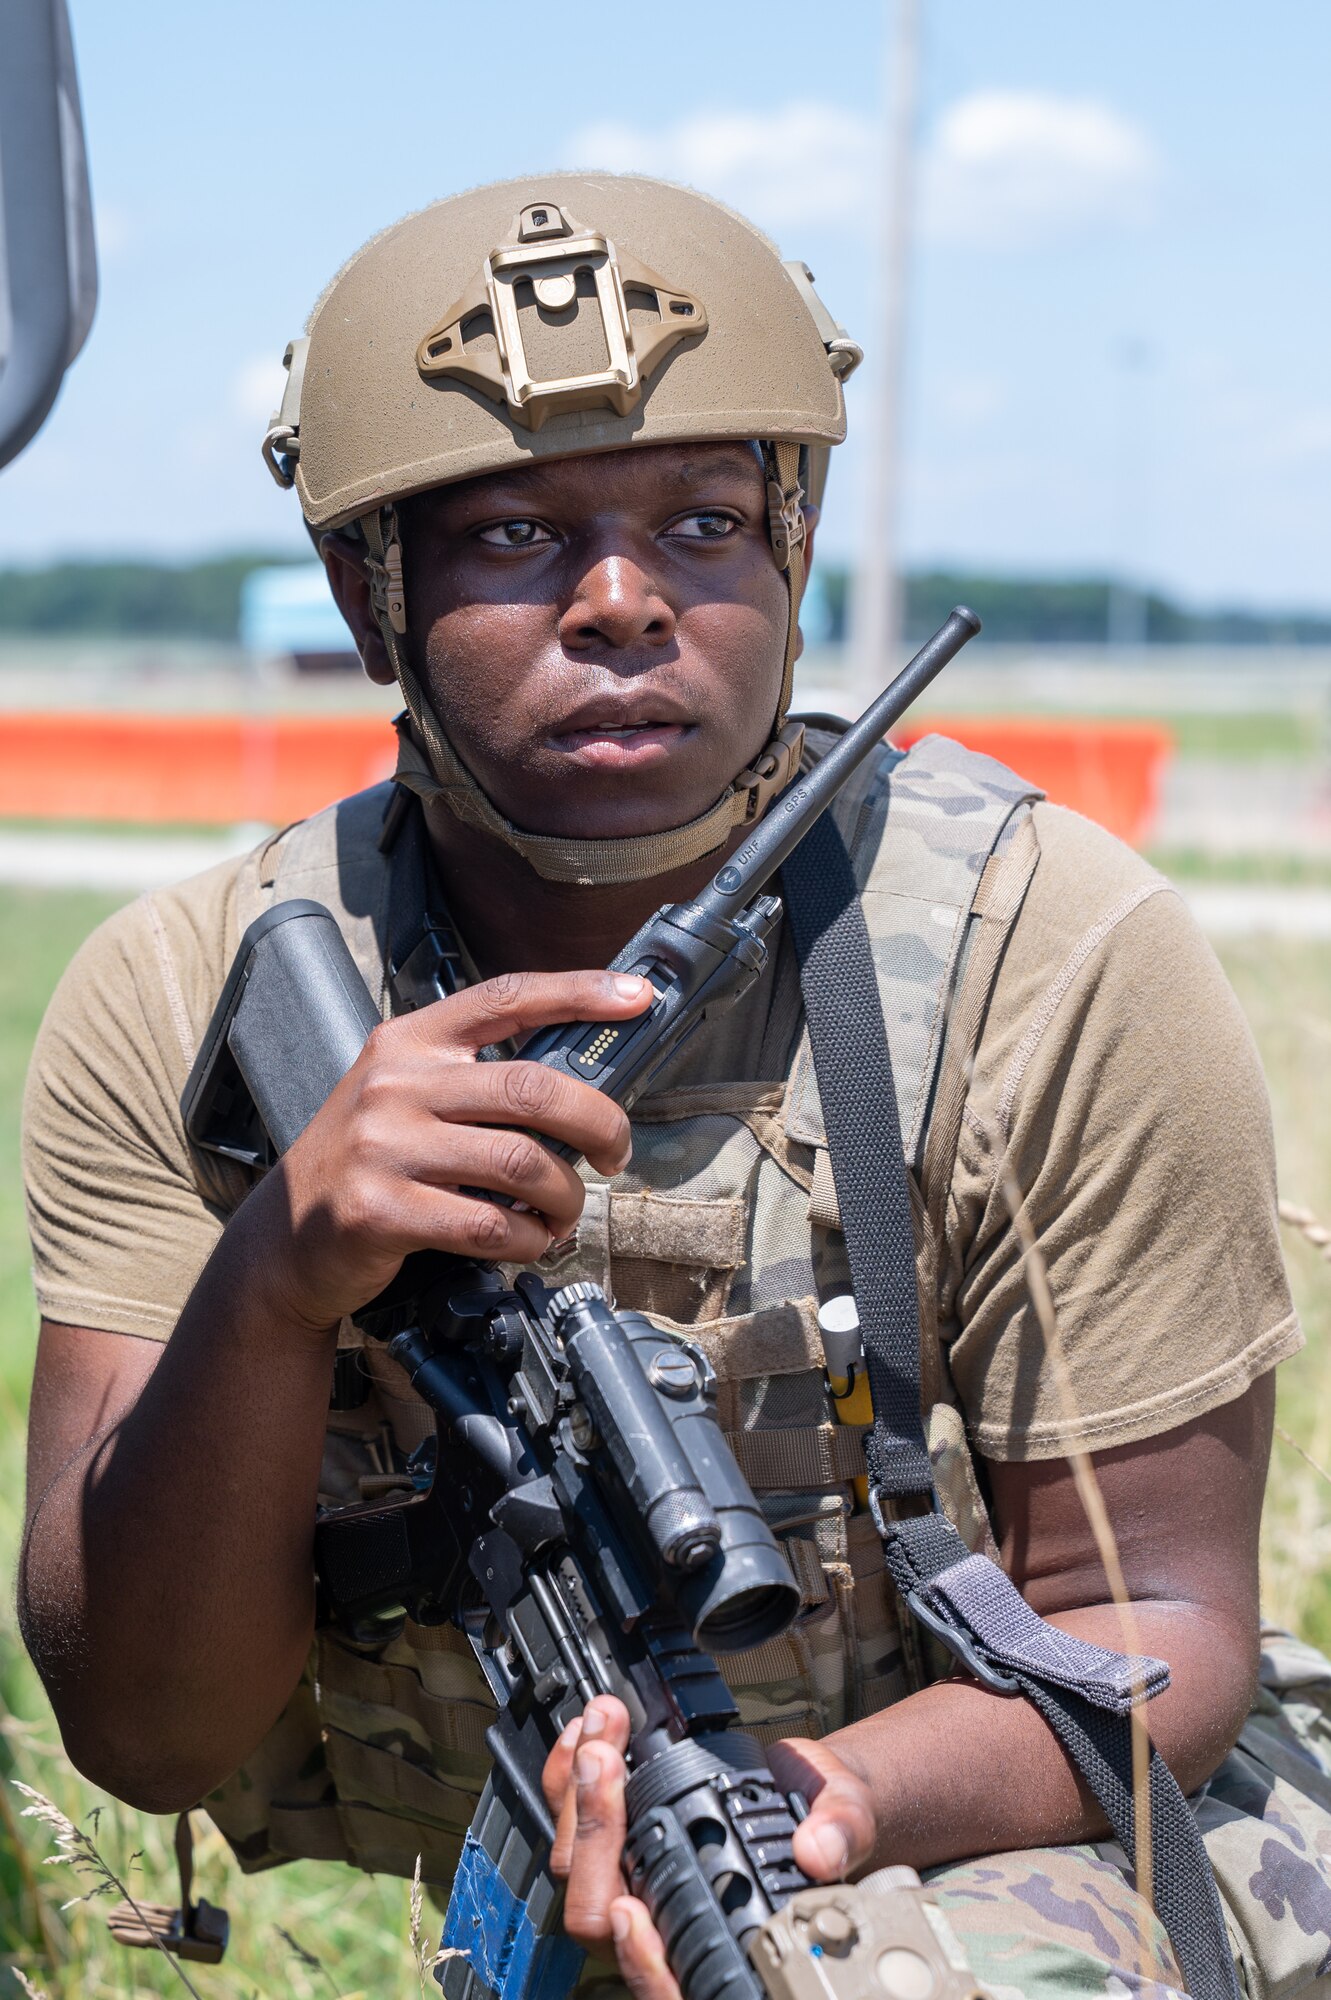 Senior Airman Qwesi Benson, 436th Security Forces Squadron response force member, awaits orders from his superior after responding to simulated armed attackers outside the camp perimeter during Liberty Eagle Readiness Exercise 2022 at Dover Air Force Base, Delaware, July 14, 2022. The 436th and 512th Airlift Wings tested their ability to generate, employ and sustain airpower across the world in a contested and degraded operational environment. (U.S. Air Force photo by Mauricio Campino)